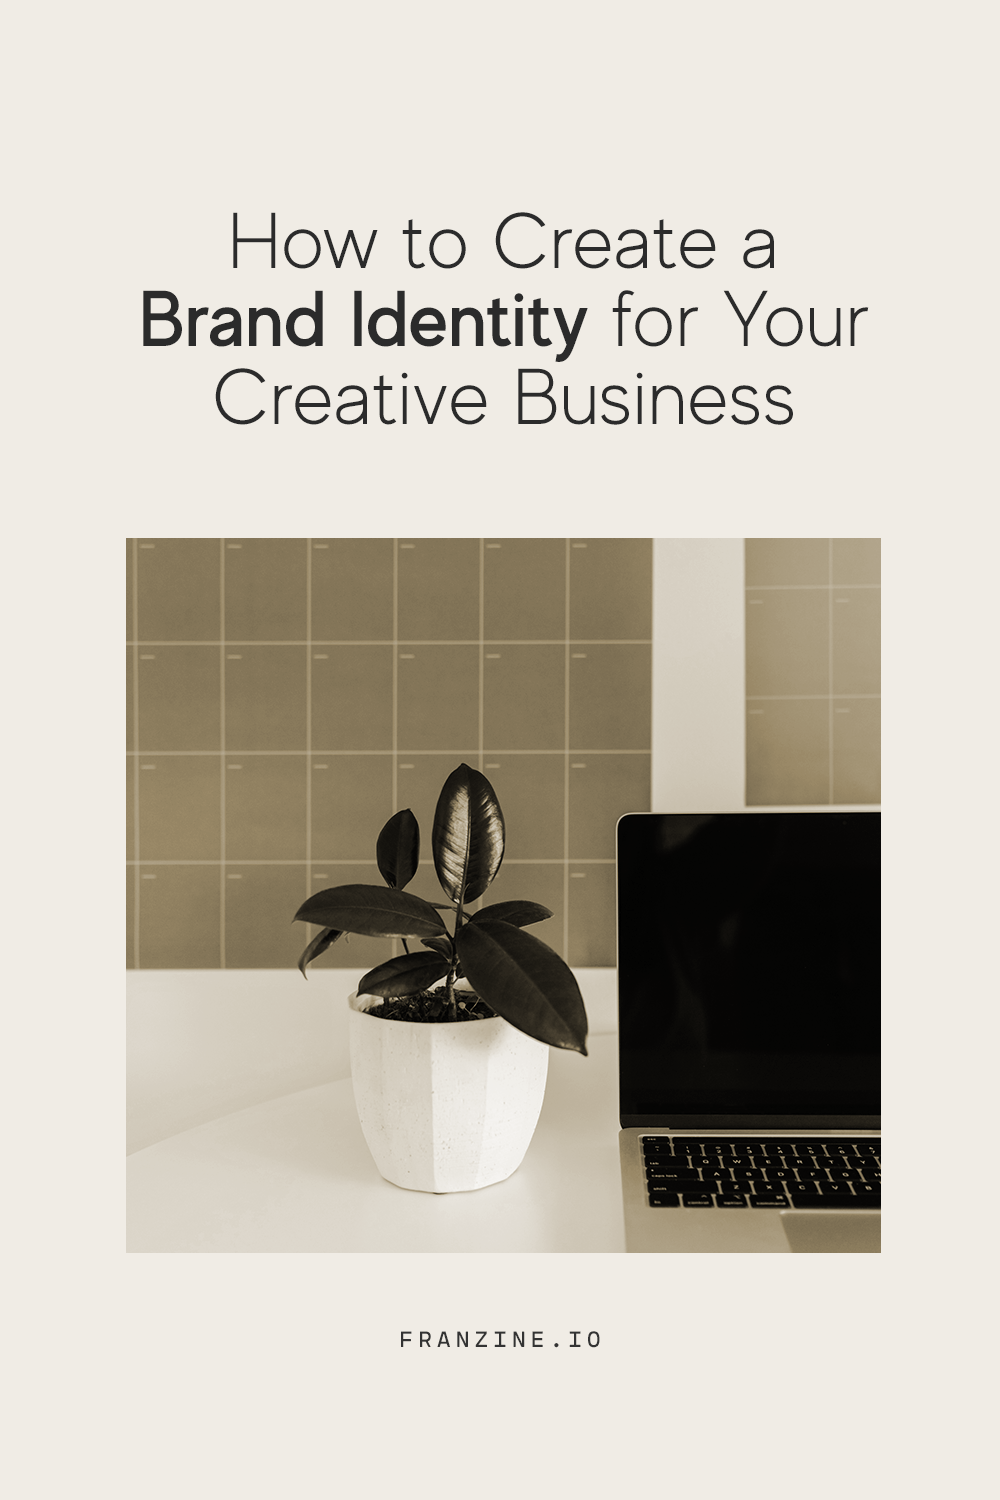 Office photo with the text "How to Create a Brand Identity for Your Creative Business"